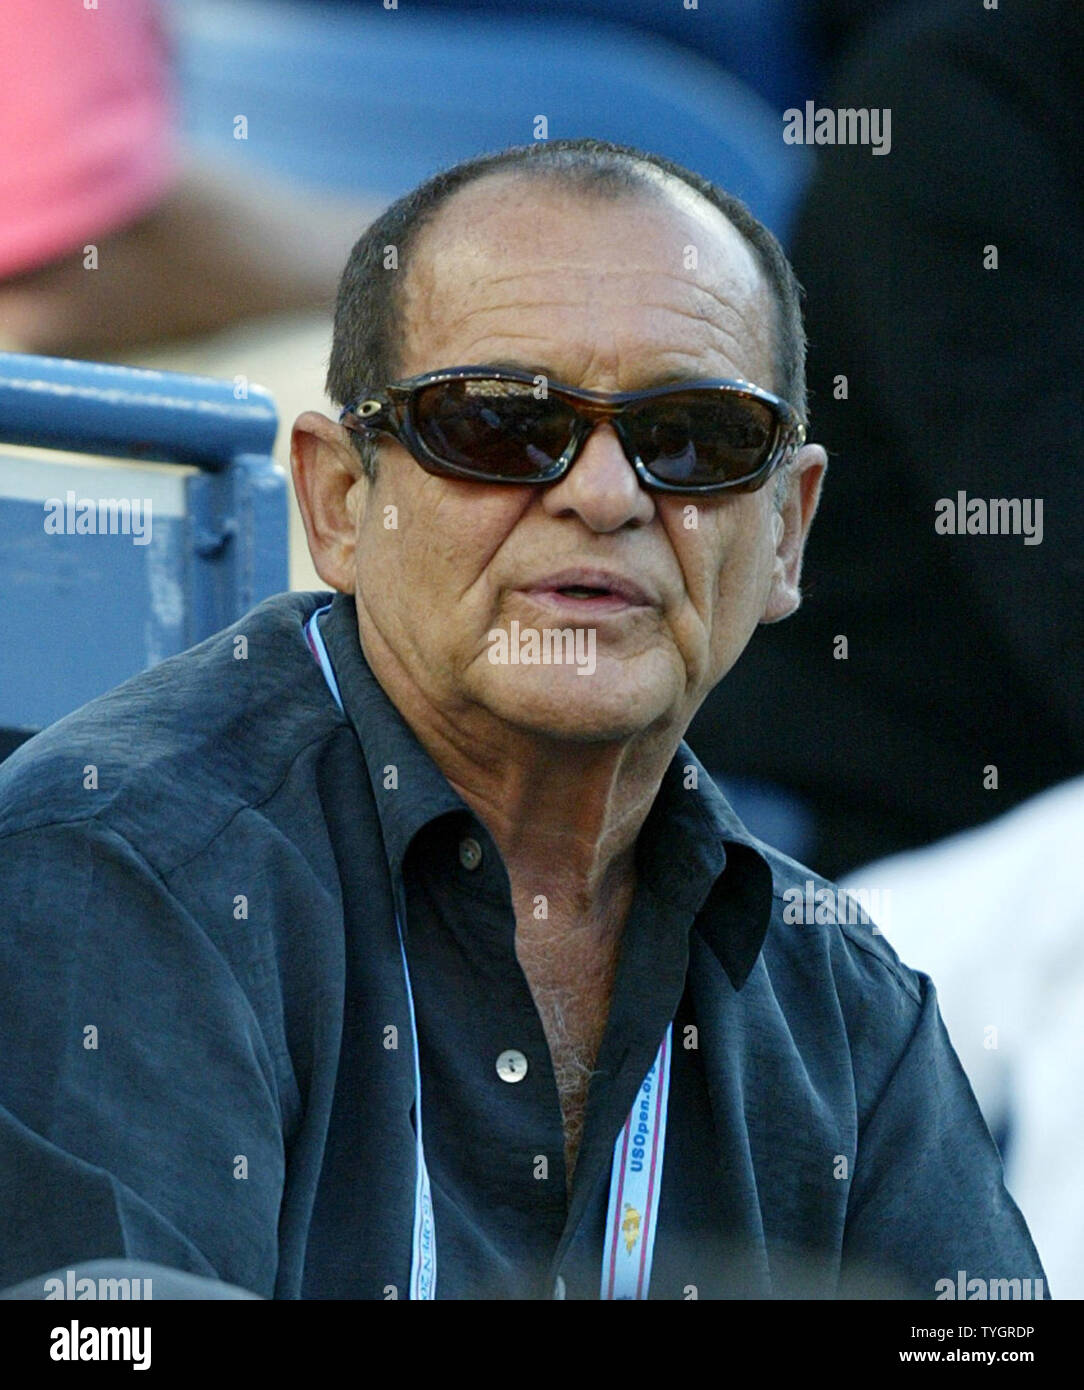 Actor Joe Pesci was on hand to watch Jennifer Capriati's defeat in 3 sets to Elena Dementieva. Elena Dementieva (RUS) advances to her first womans final at the US Open in Flushing, New York on September 10, 2004.    (UPI Photo/John Angelillo) Stock Photo